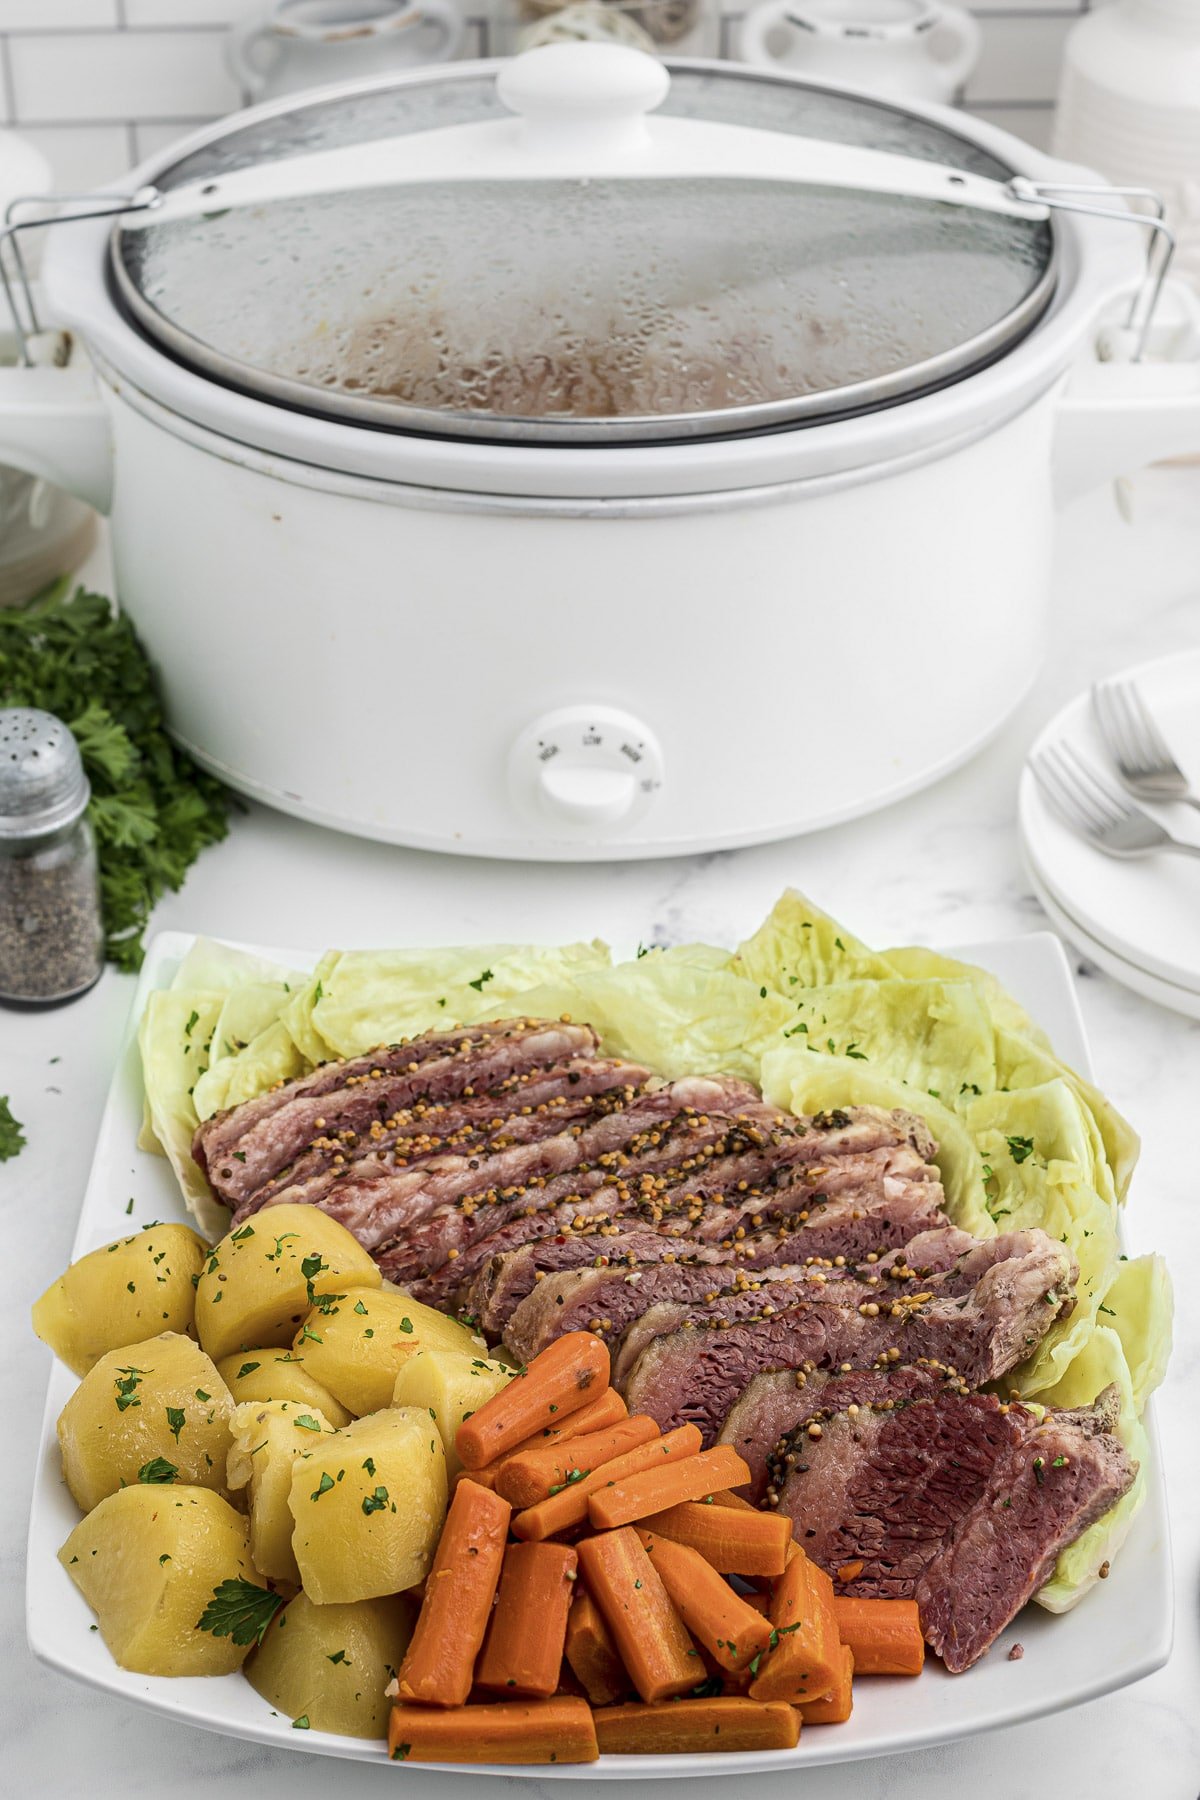 tray of corned beef and cabbage in front of slow cooker